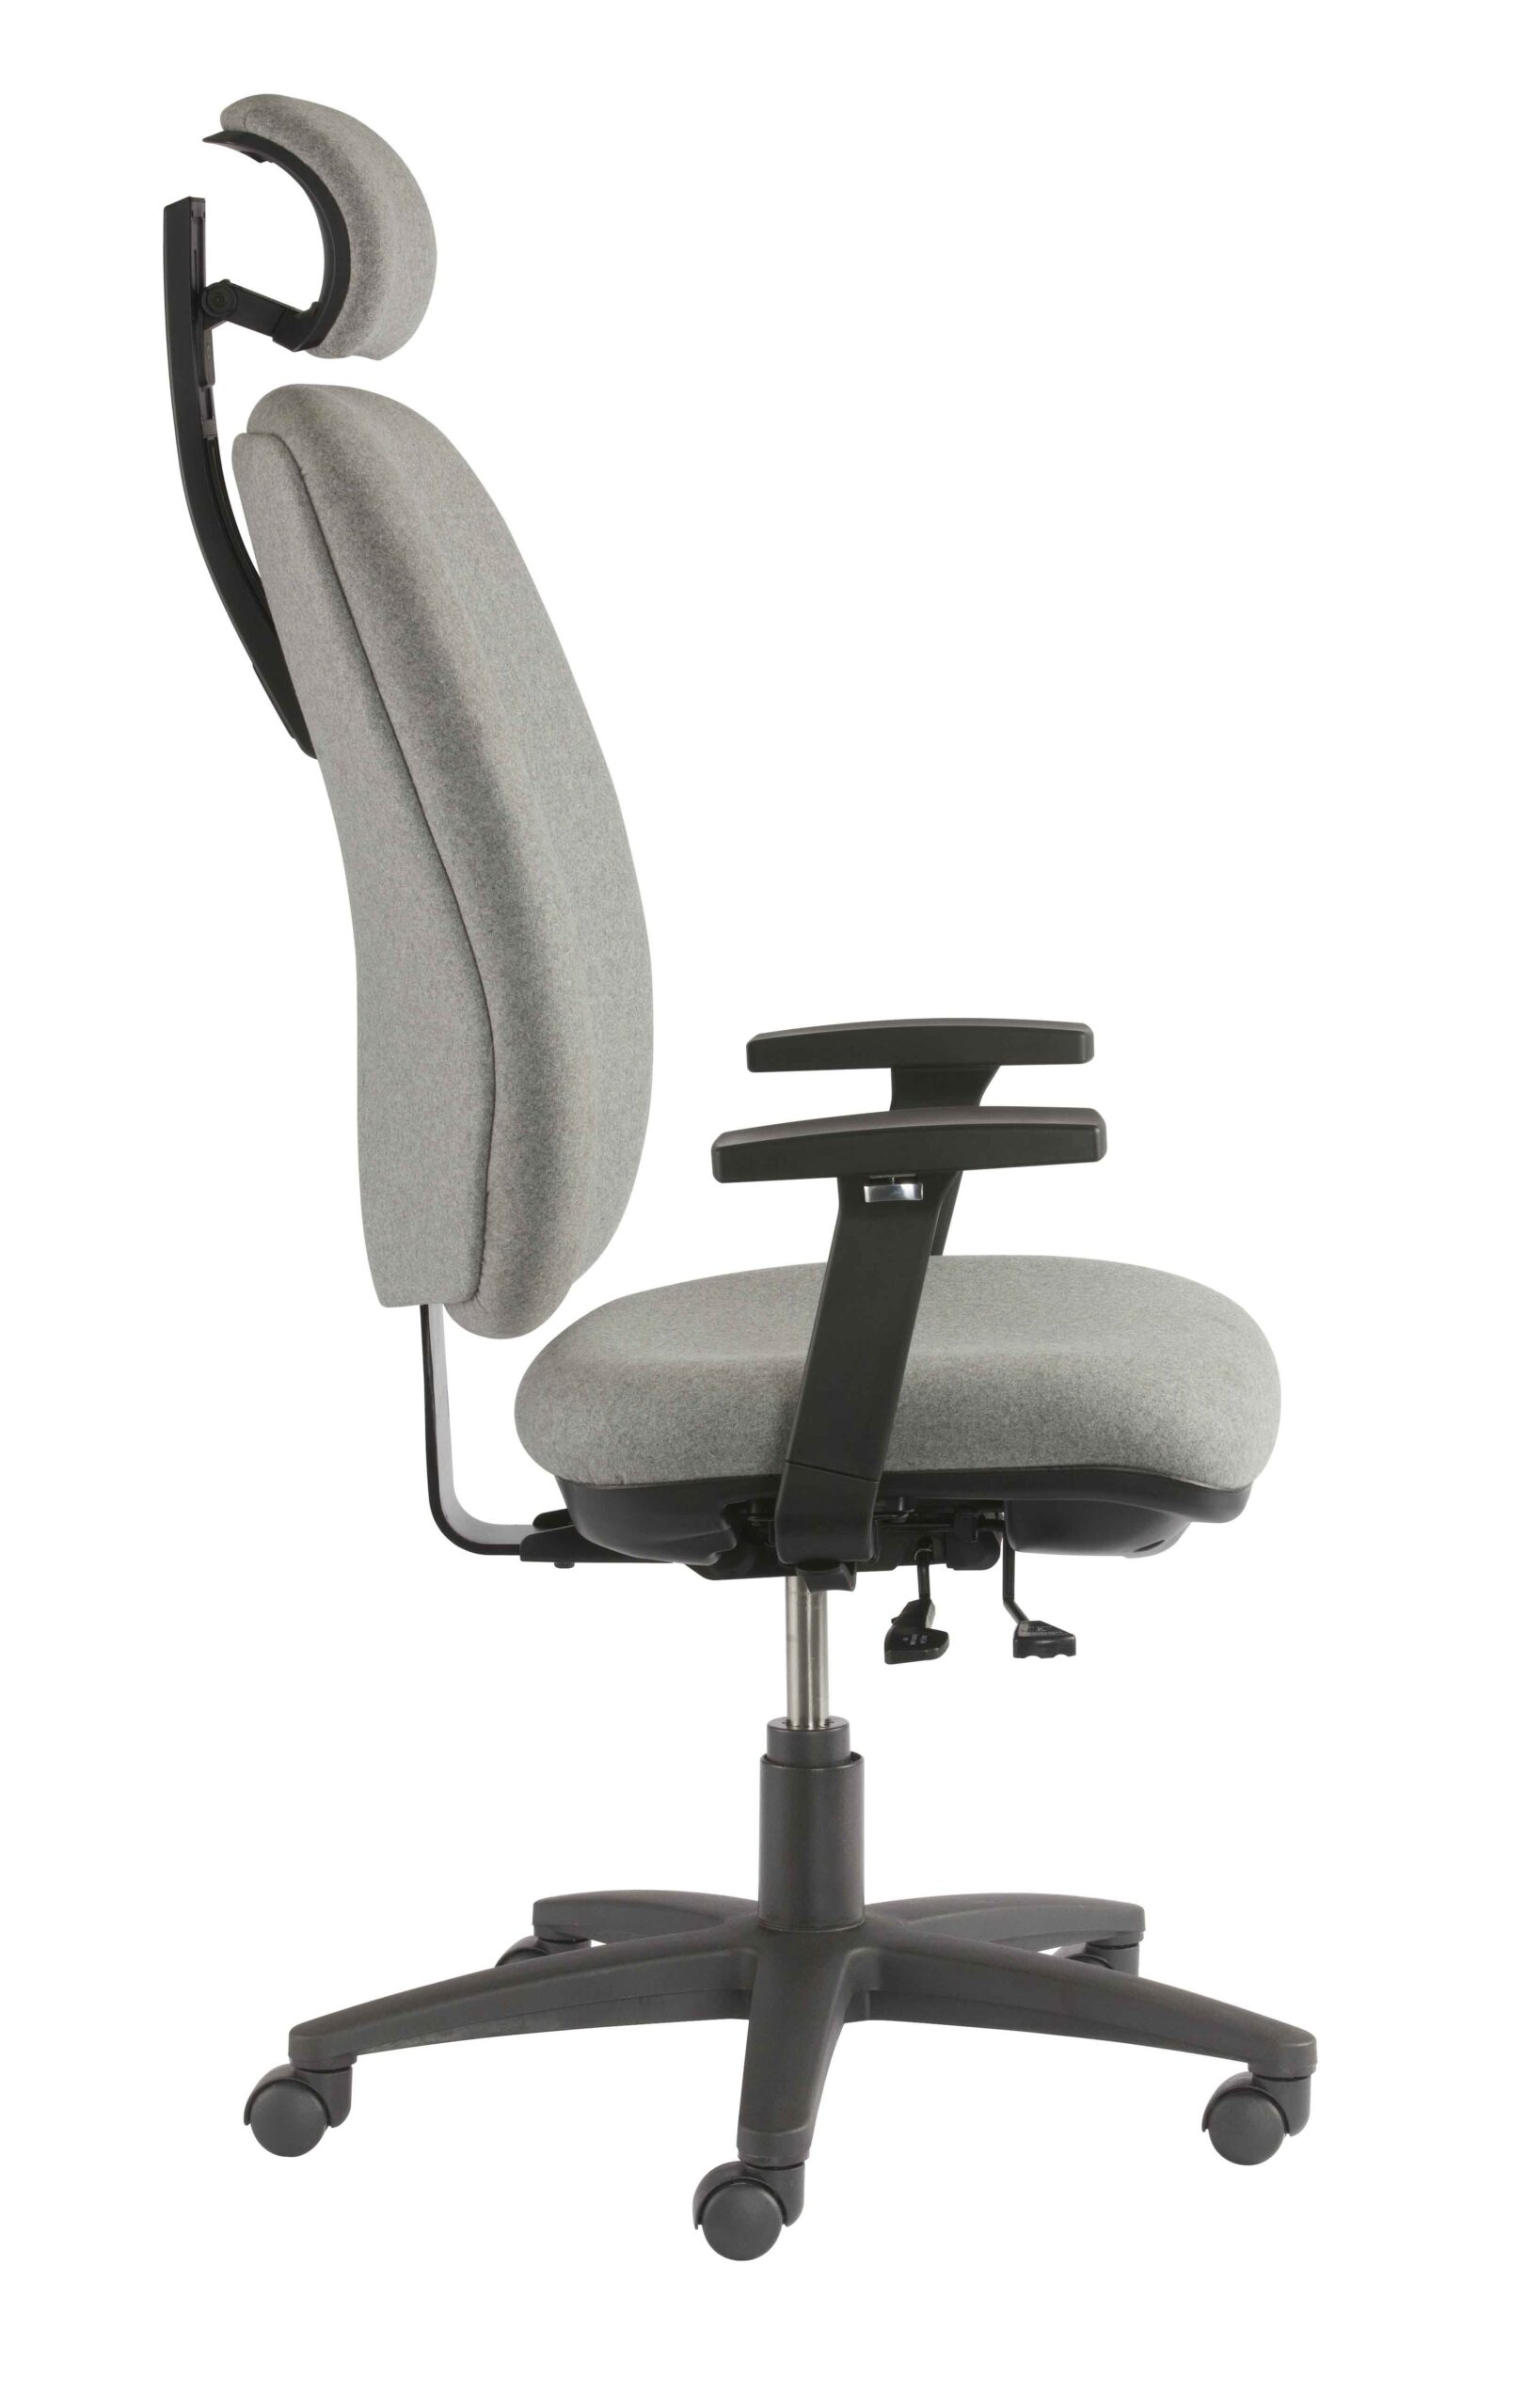 Nightingale_Frio_2300_with_headrest_side_Mikmaq_Office_Furniture-scaled-1.jpg